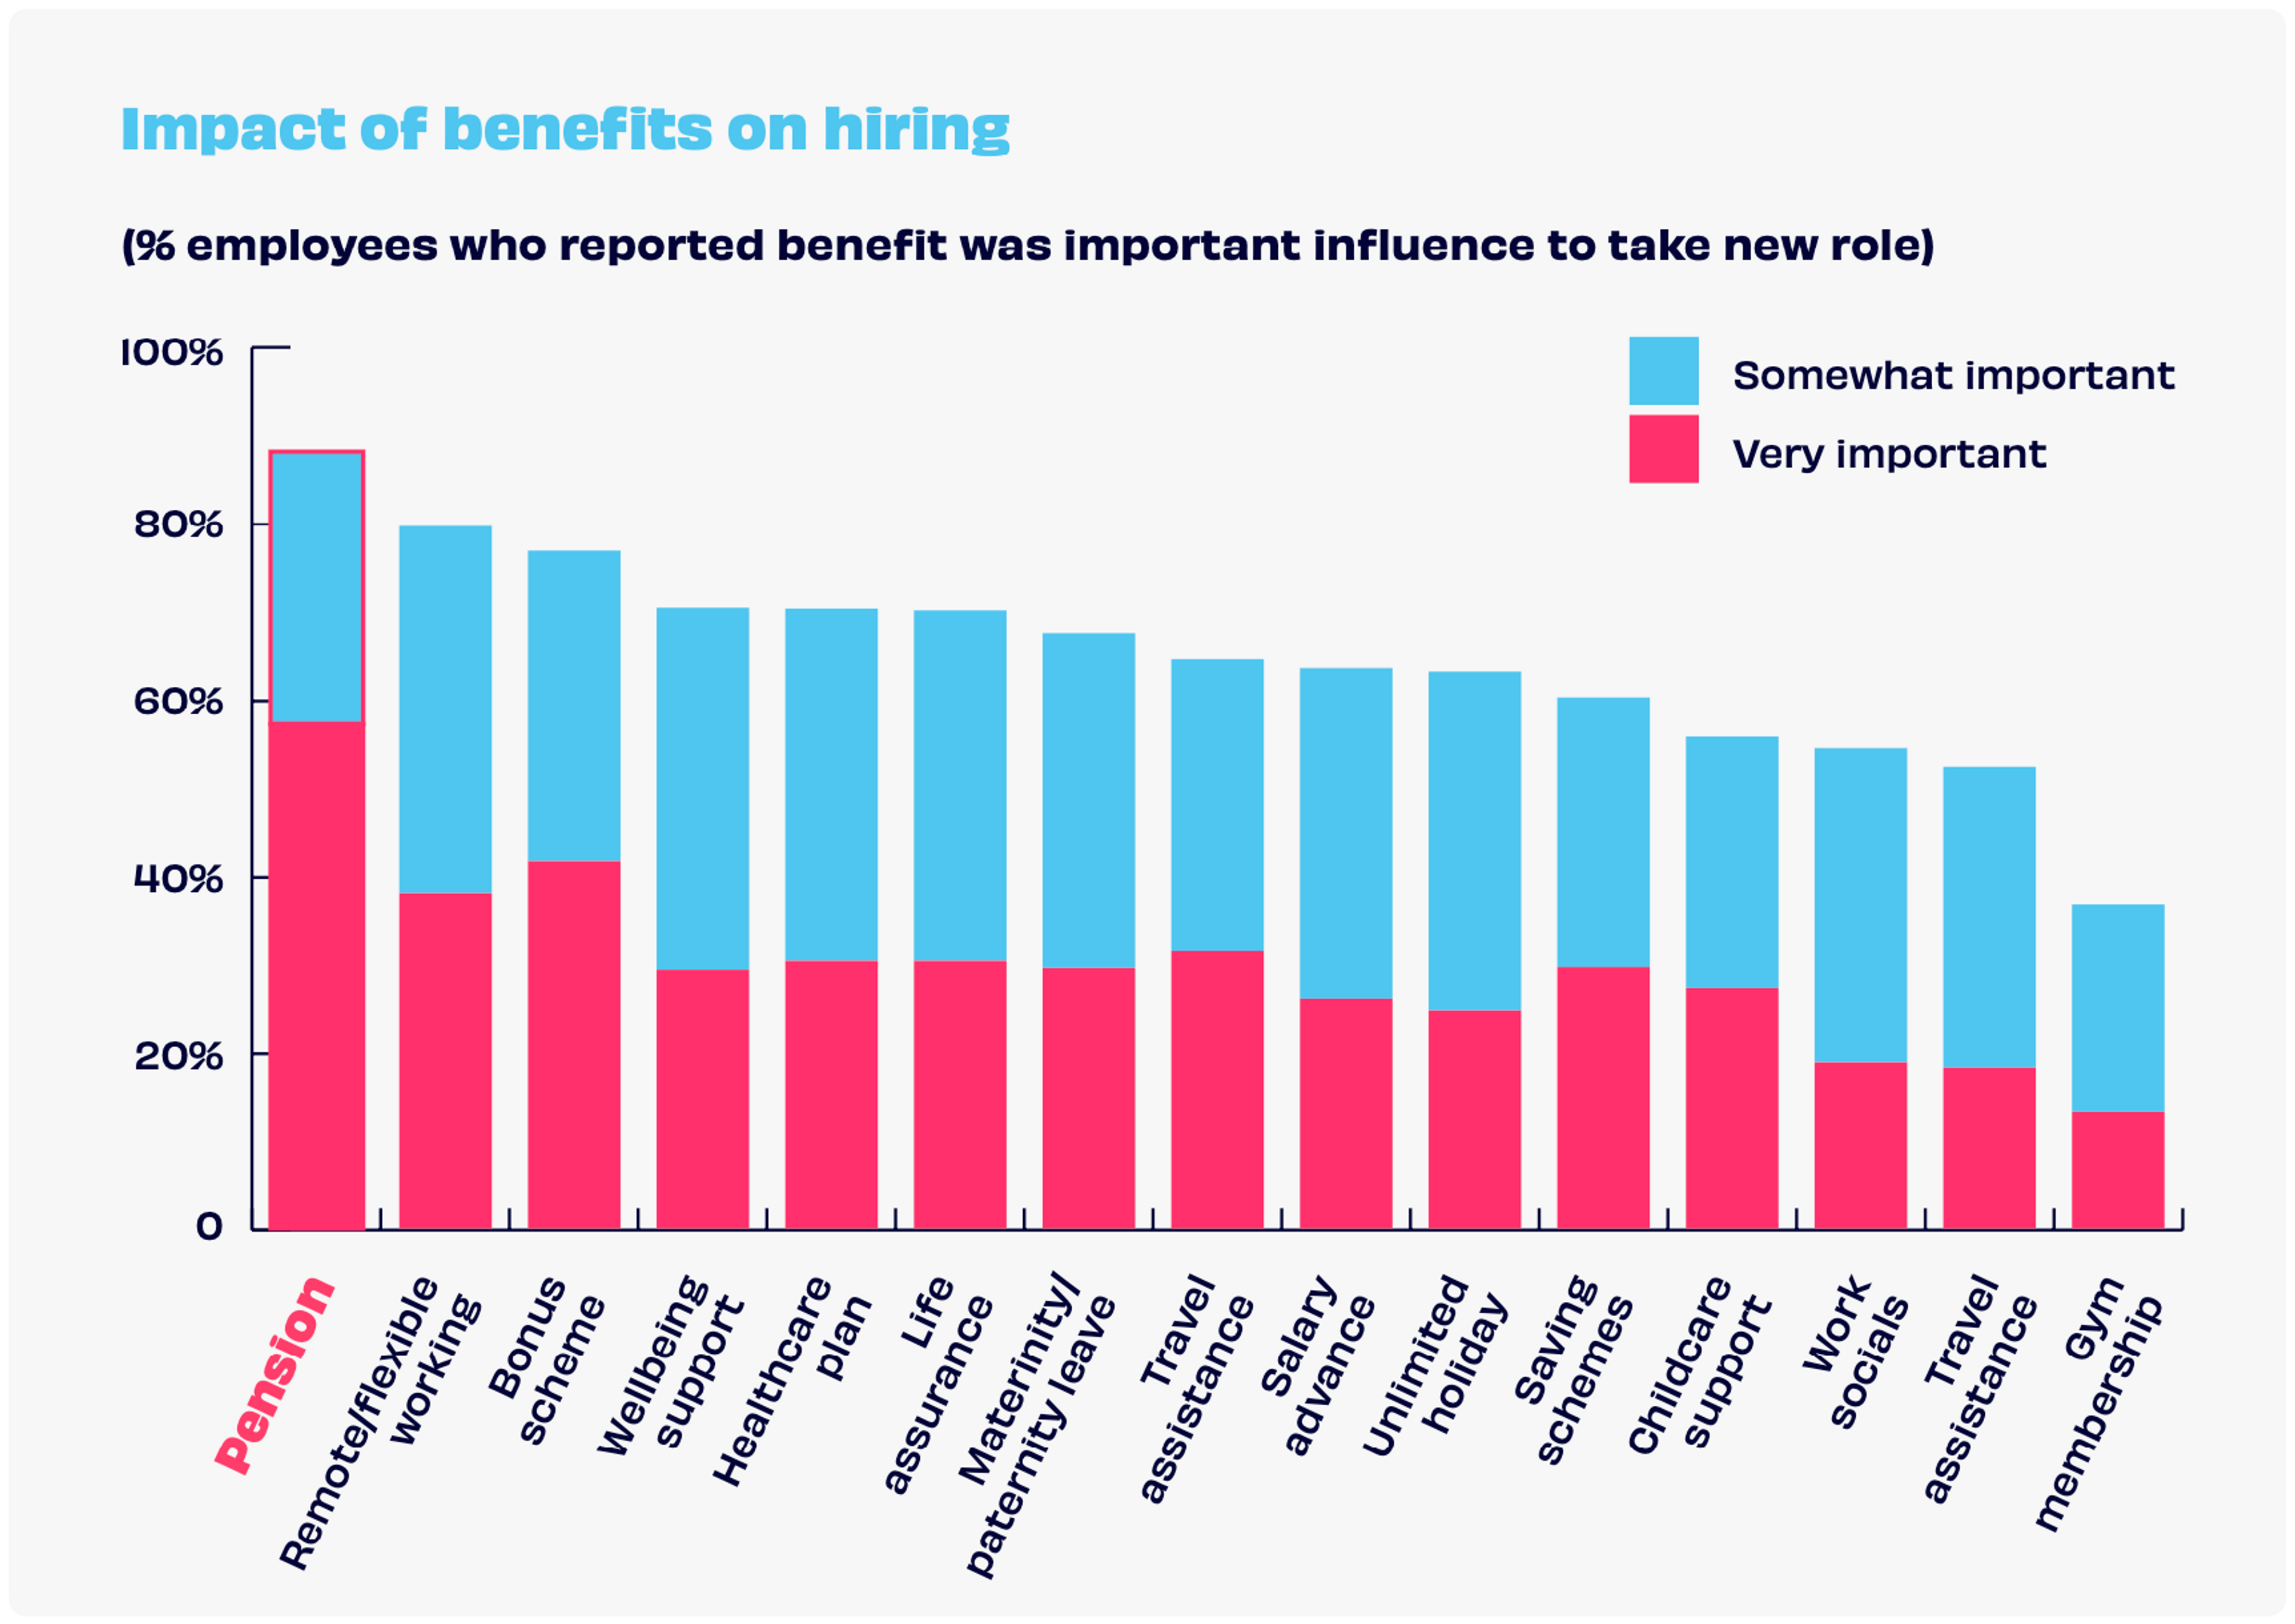 A column chart showing the impact of benefits on hiring